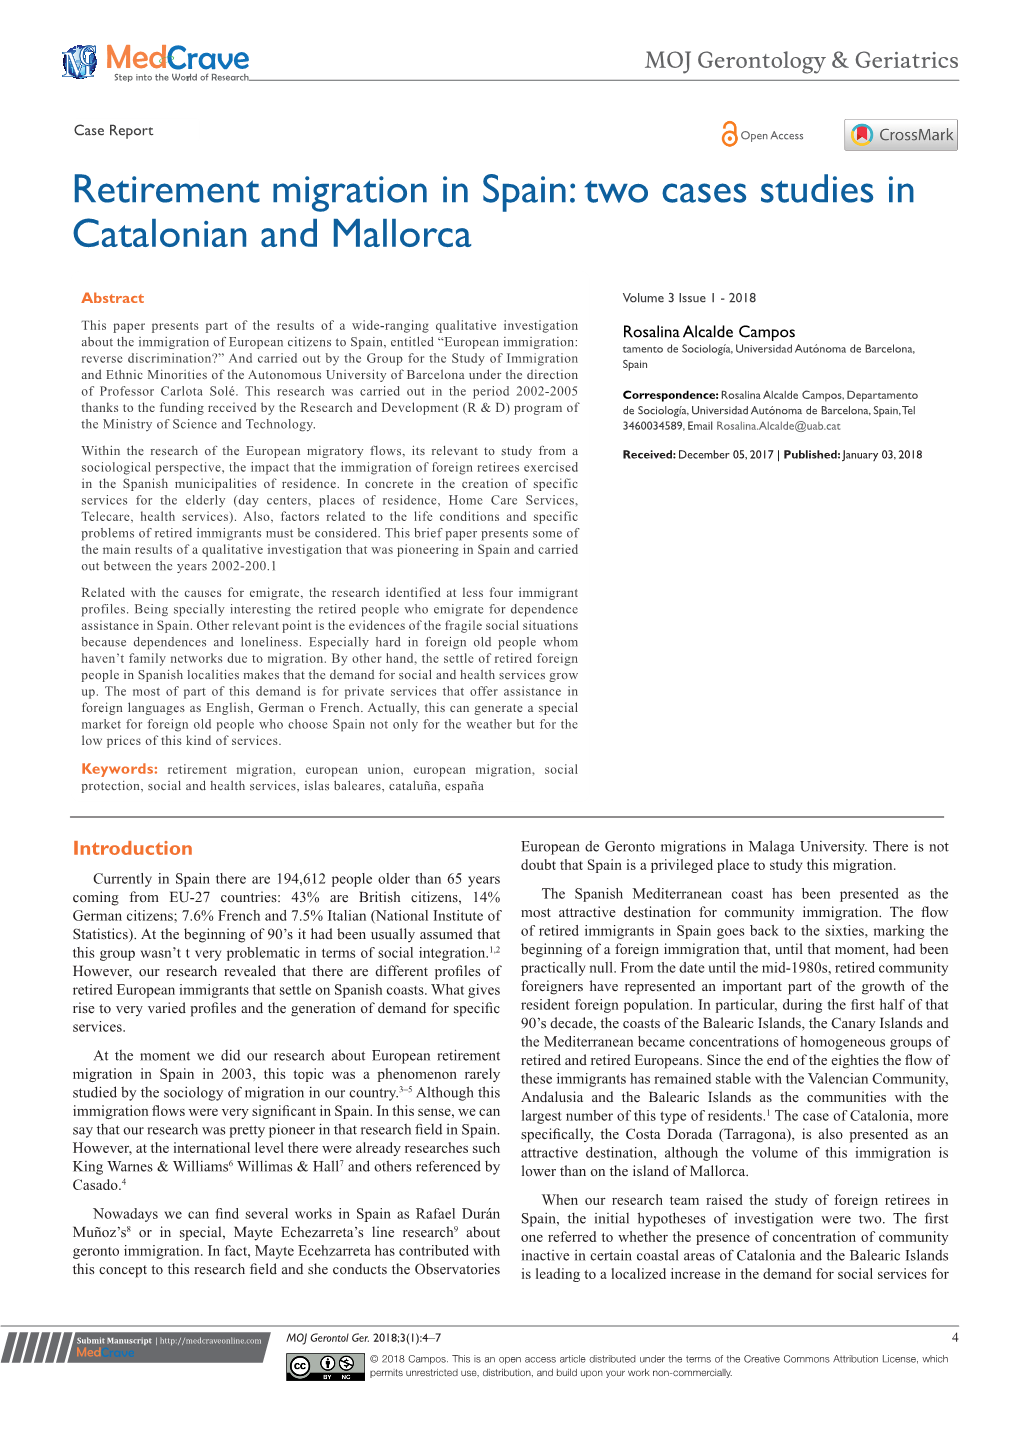 Retirement Migration in Spain: Two Cases Studies in Catalonian and Mallorca